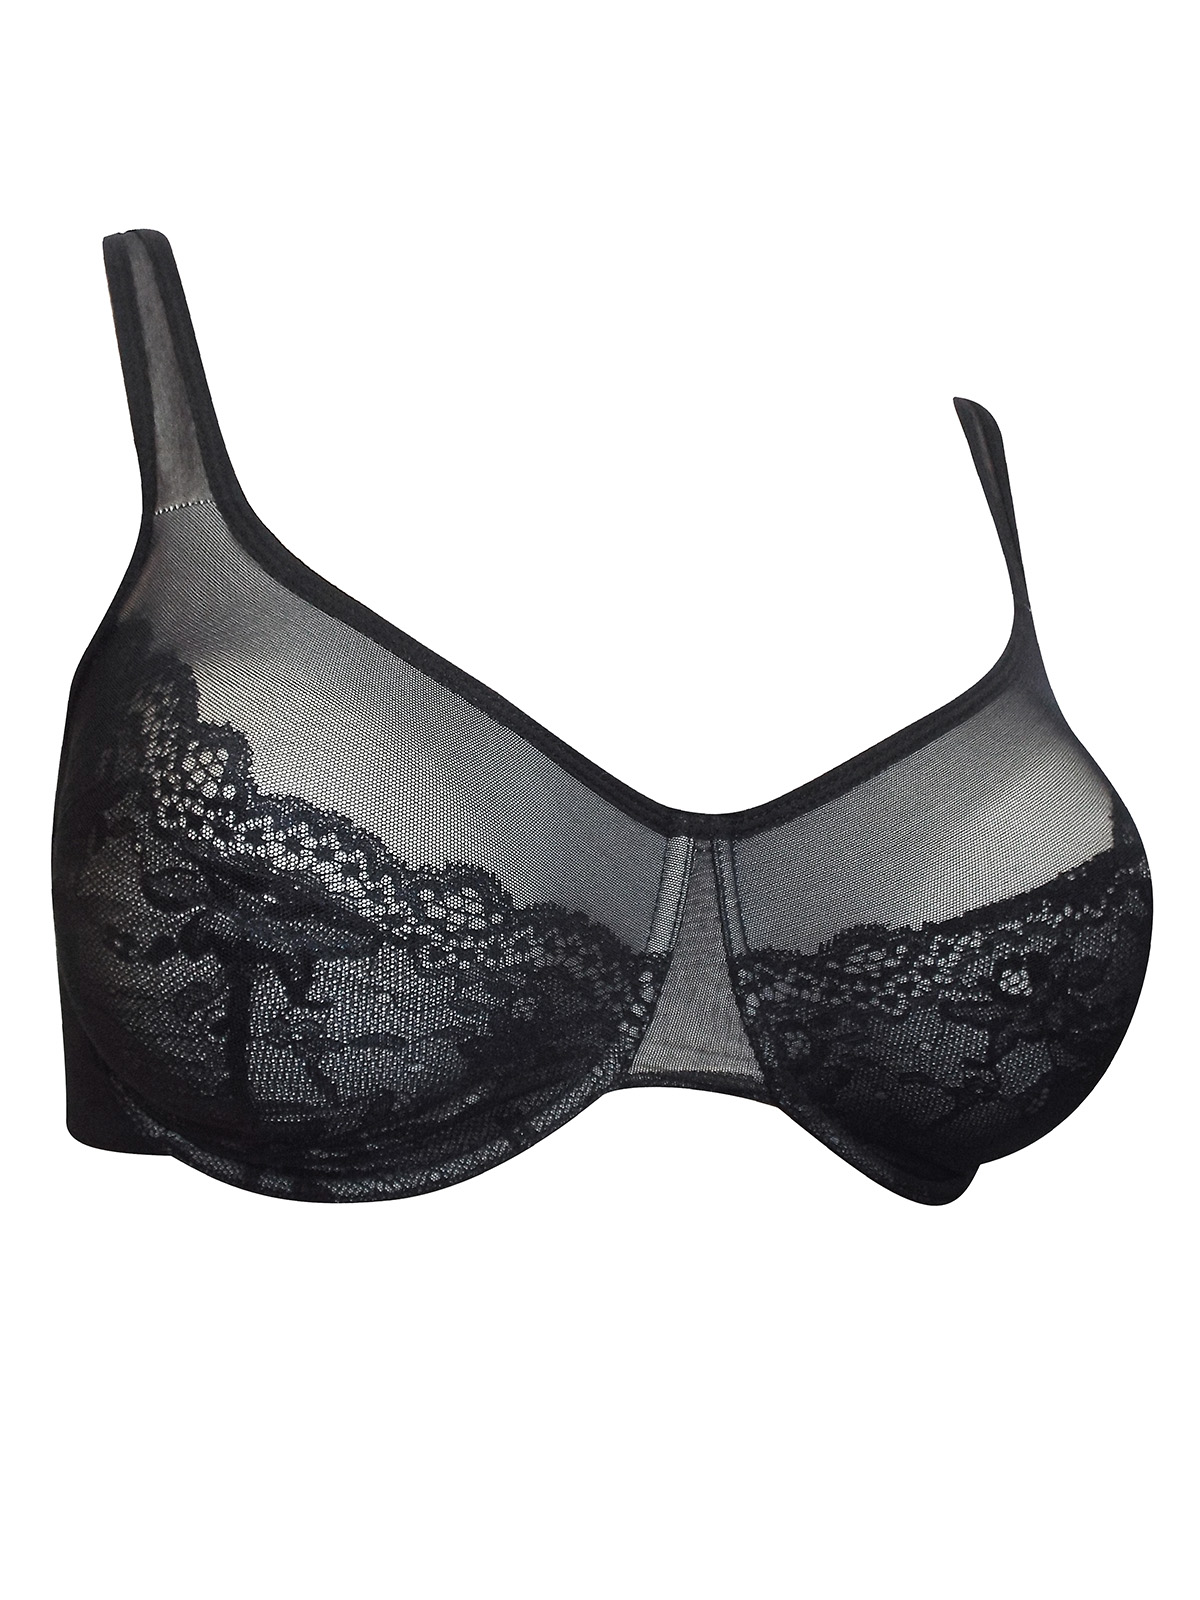 VALBONNE LADIES UNDERWIRED Bra Firm Control Lace Sexy Full Cup Black 36G  £11.99 - PicClick UK